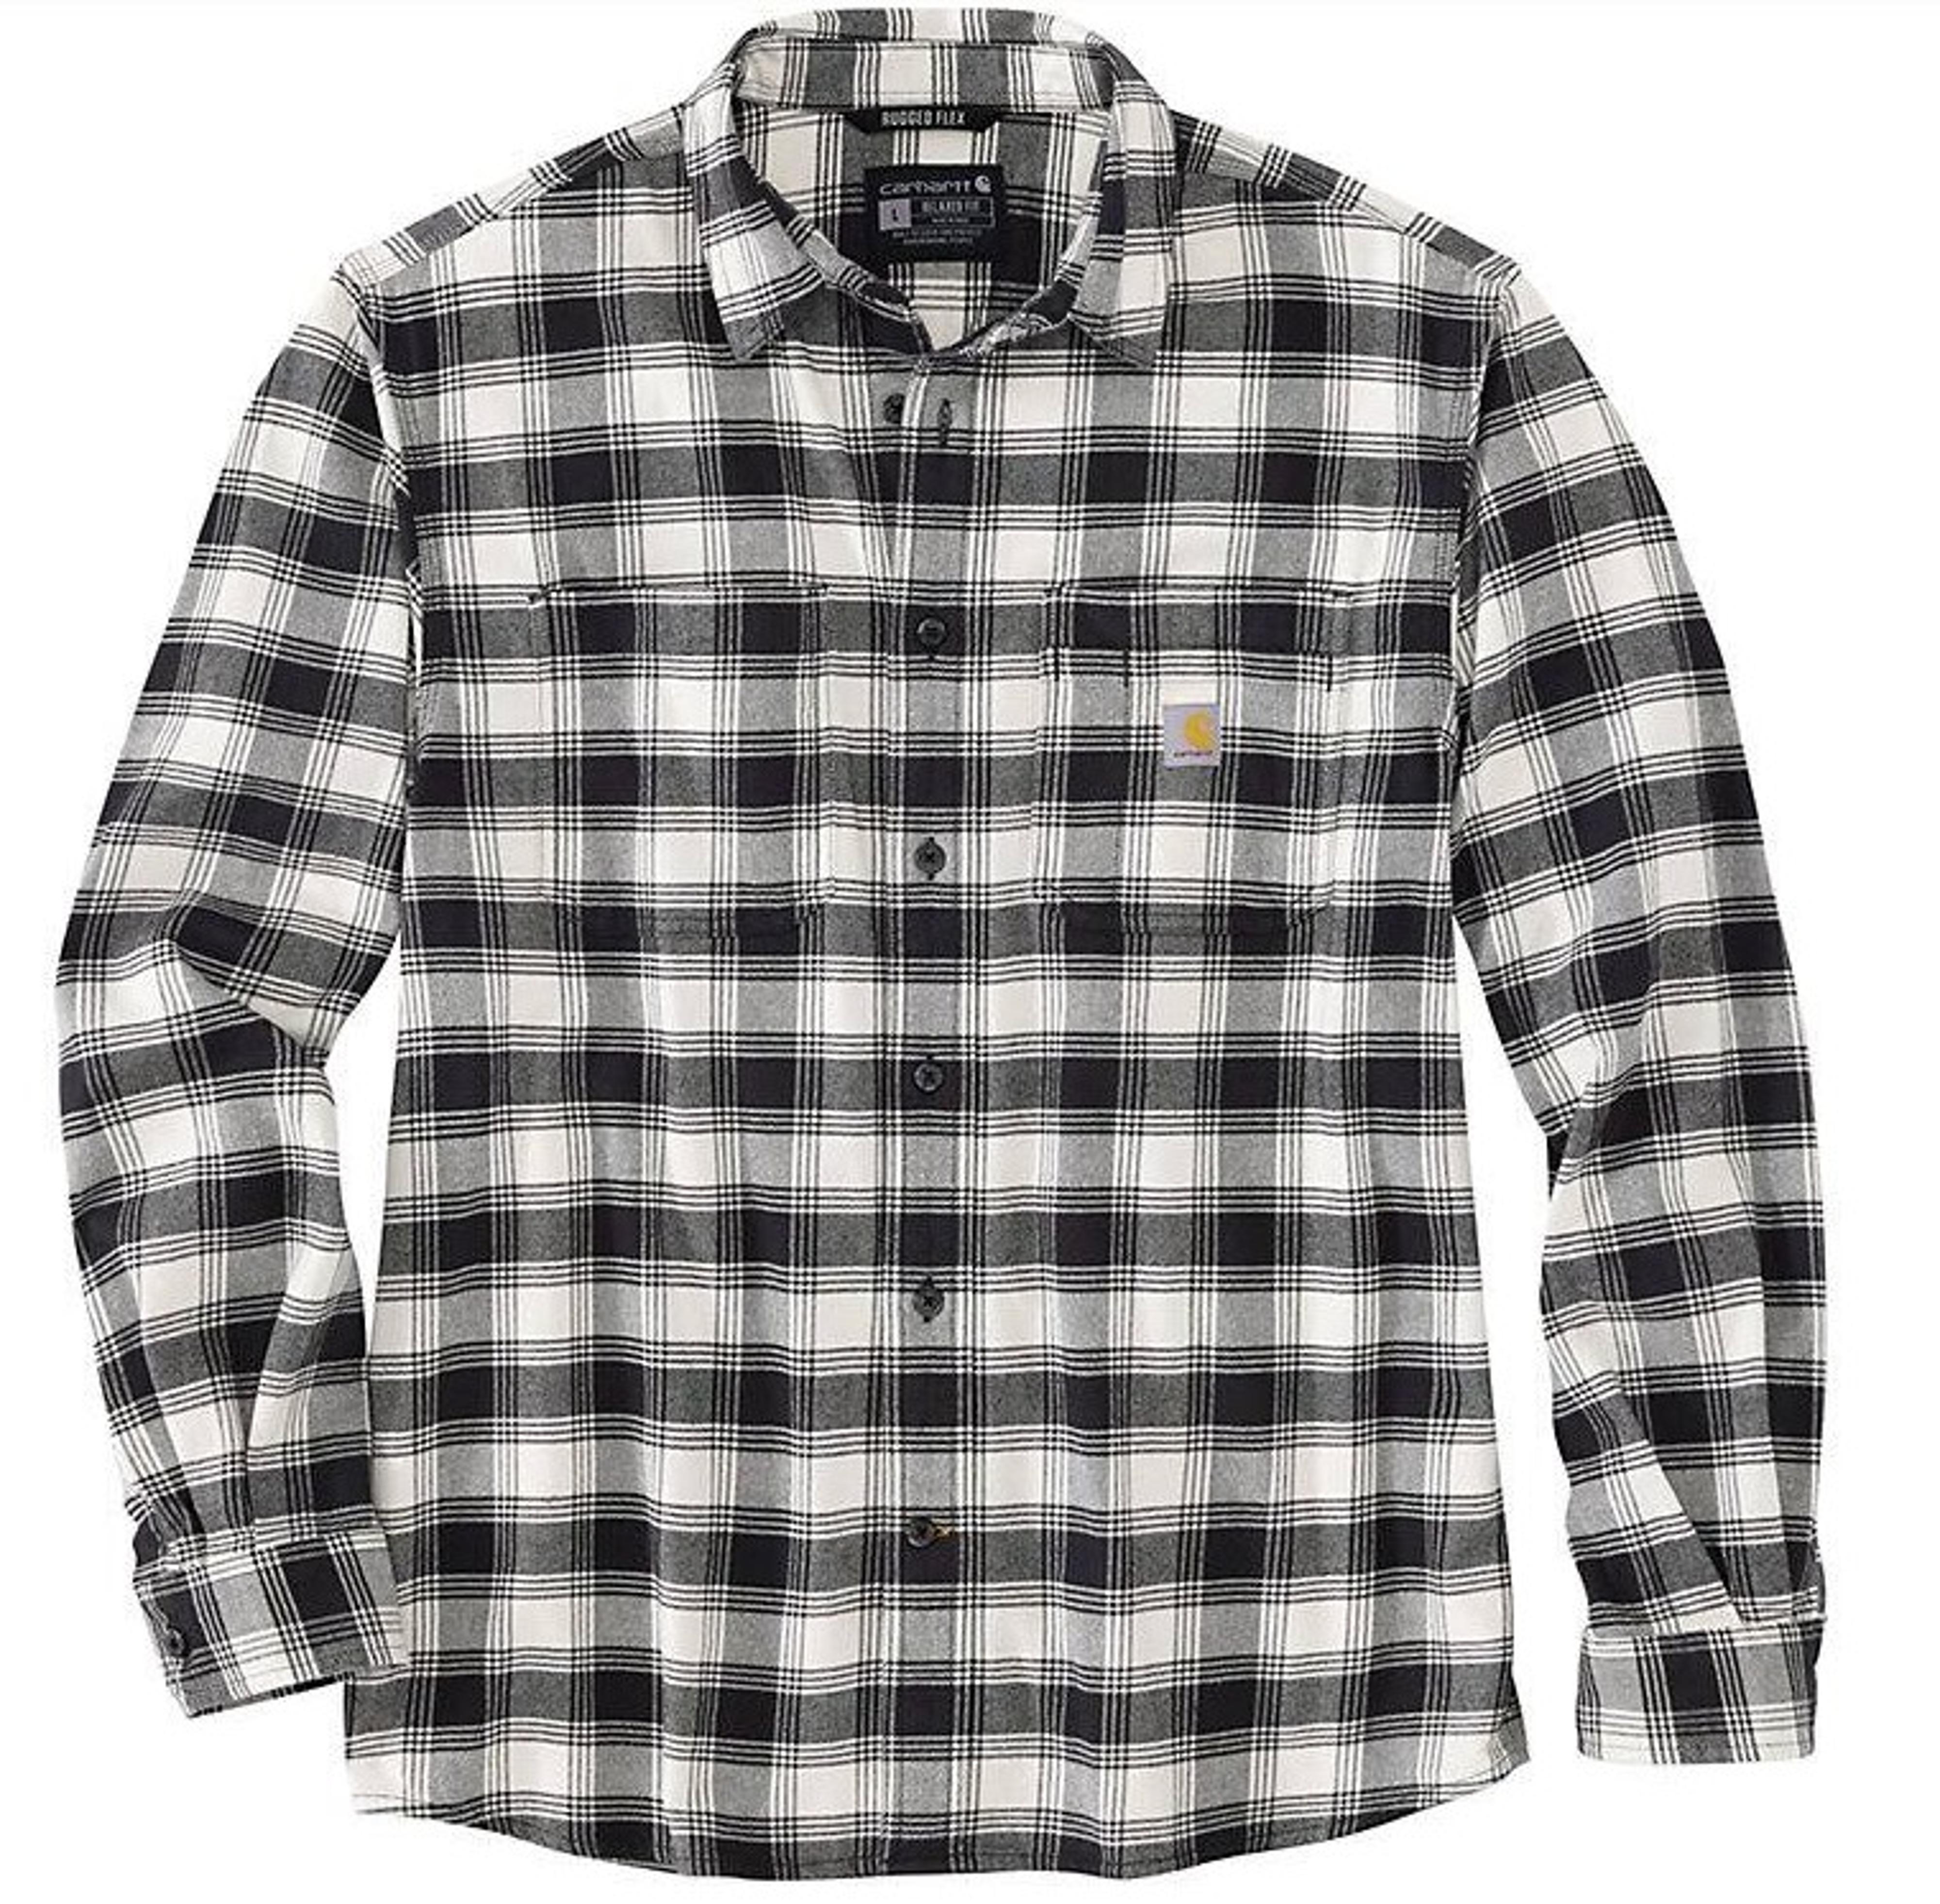  Relaxed Fit Midweight Flannel Long- Sleeve Plaid Shirt